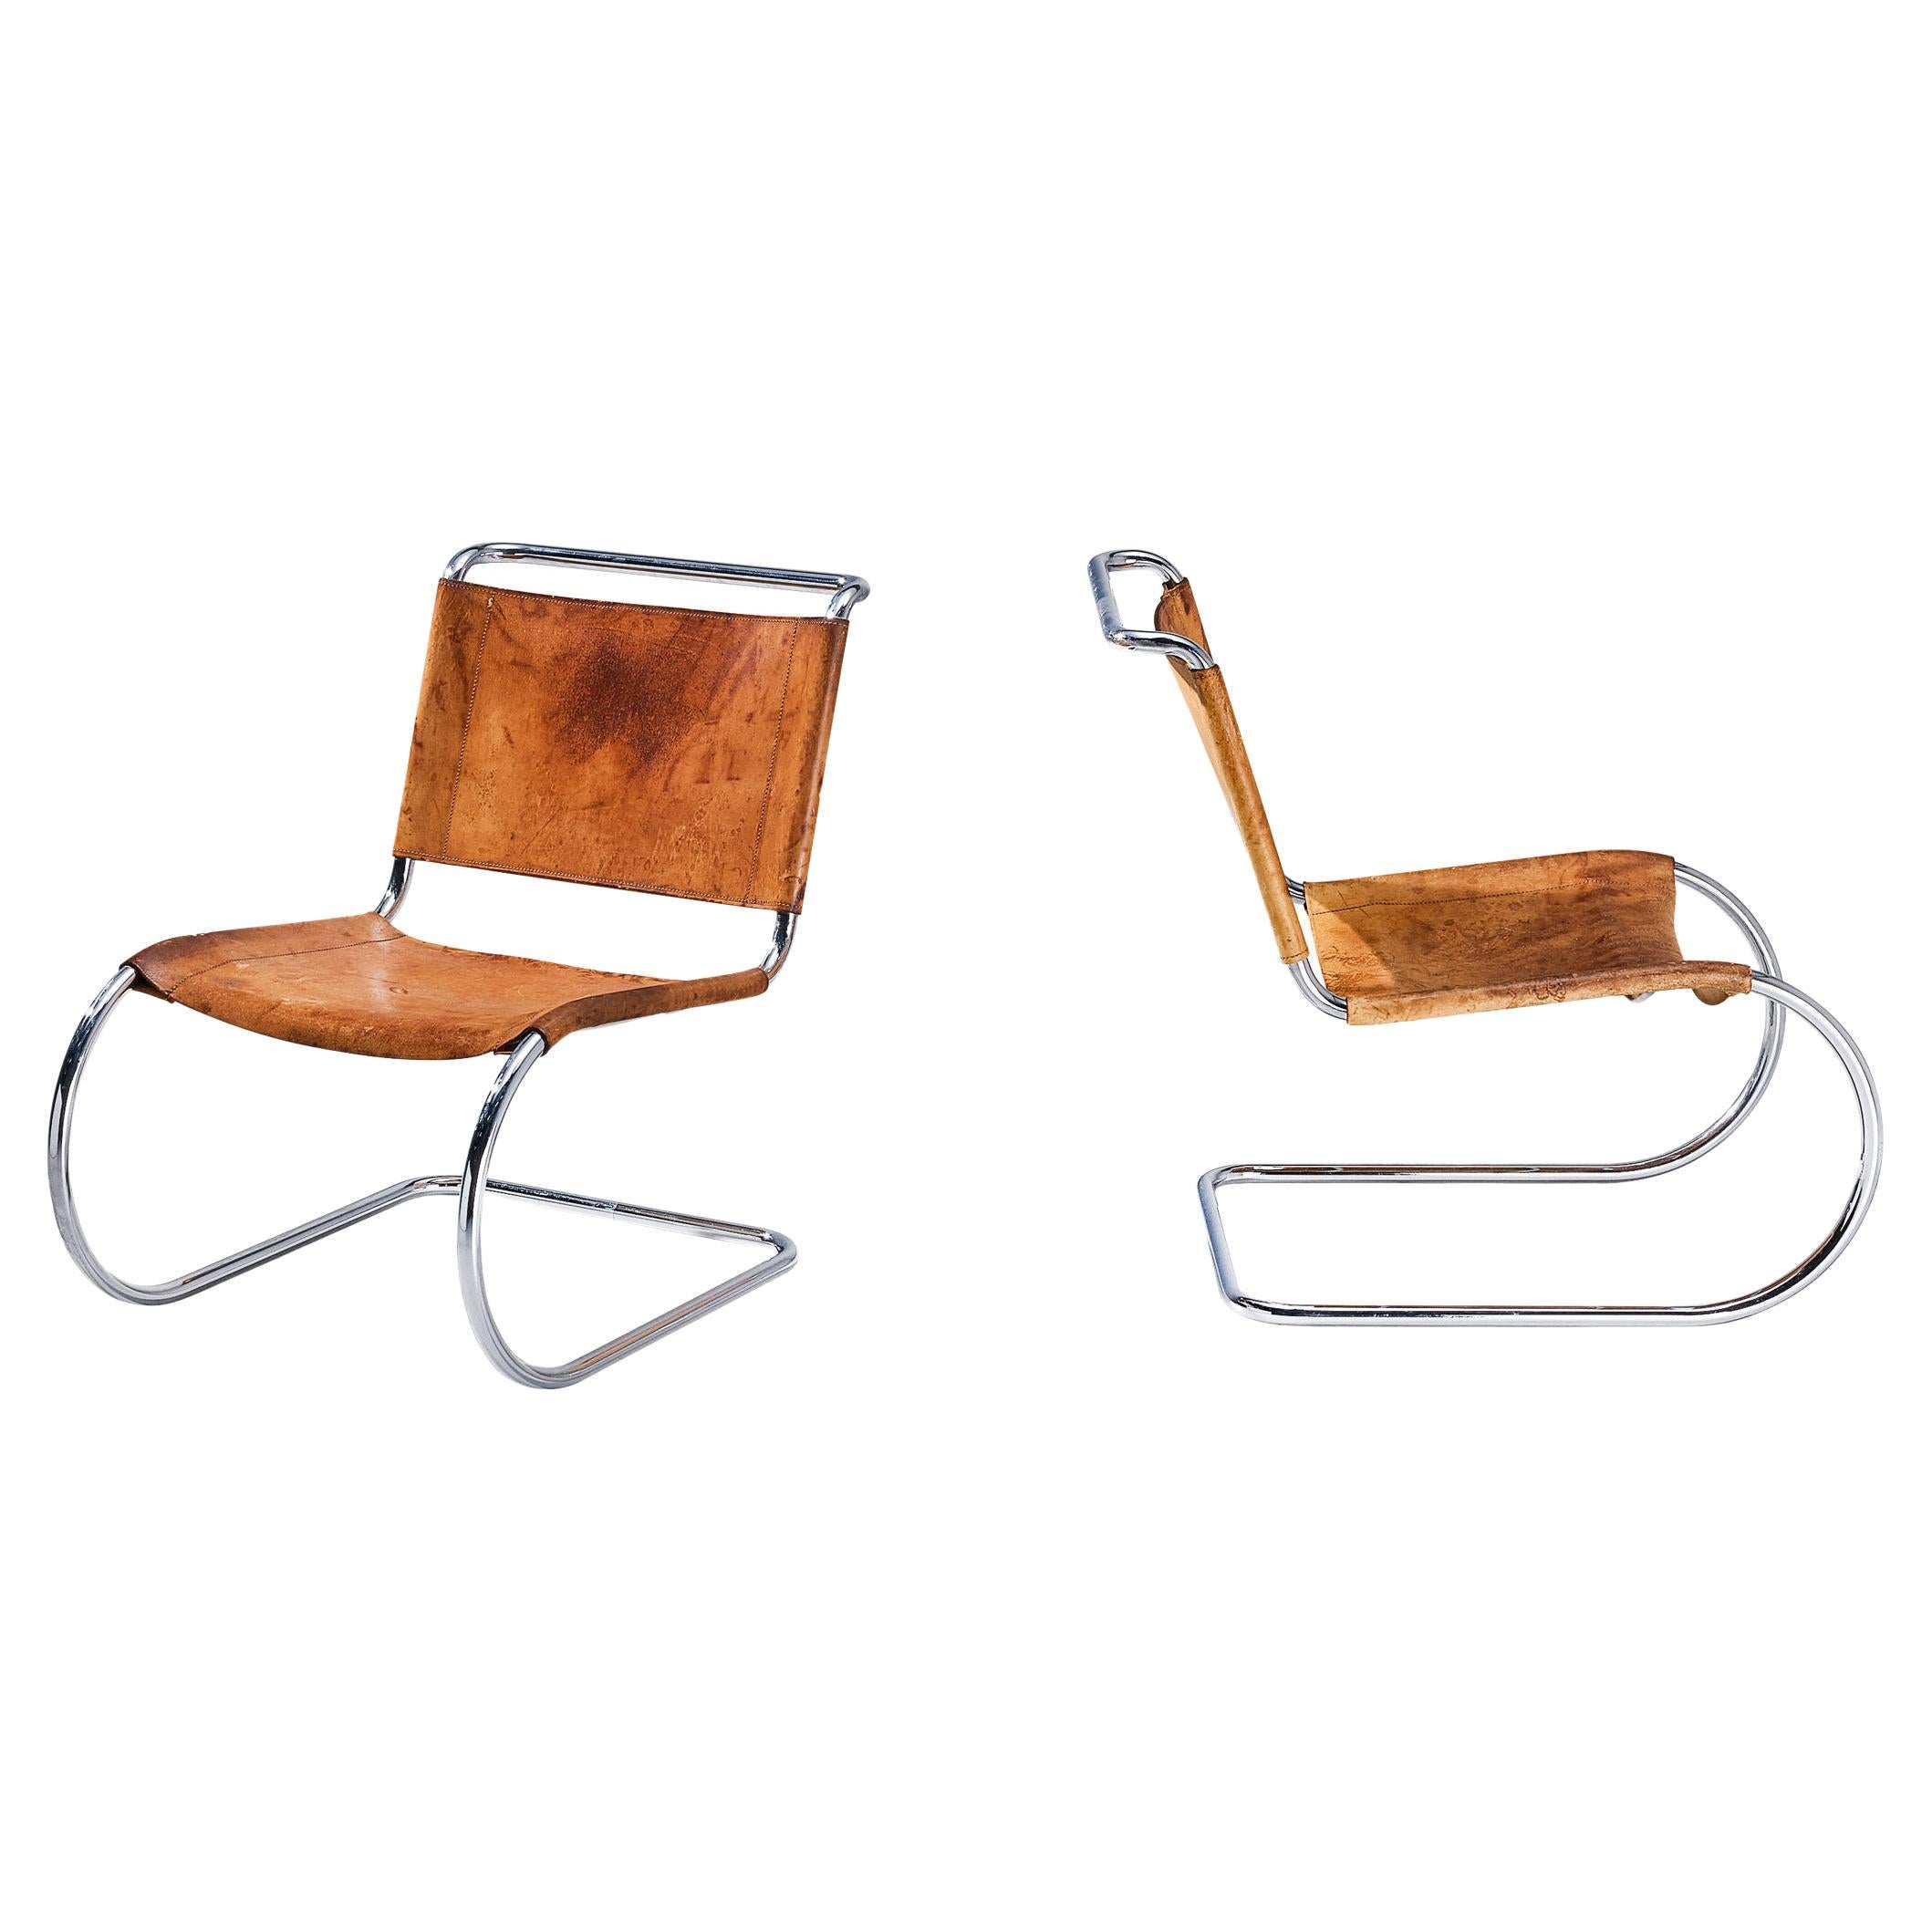 Pair of Cantilever Chairs in Cognac Leather and Chrome-plated Steel  For Sale